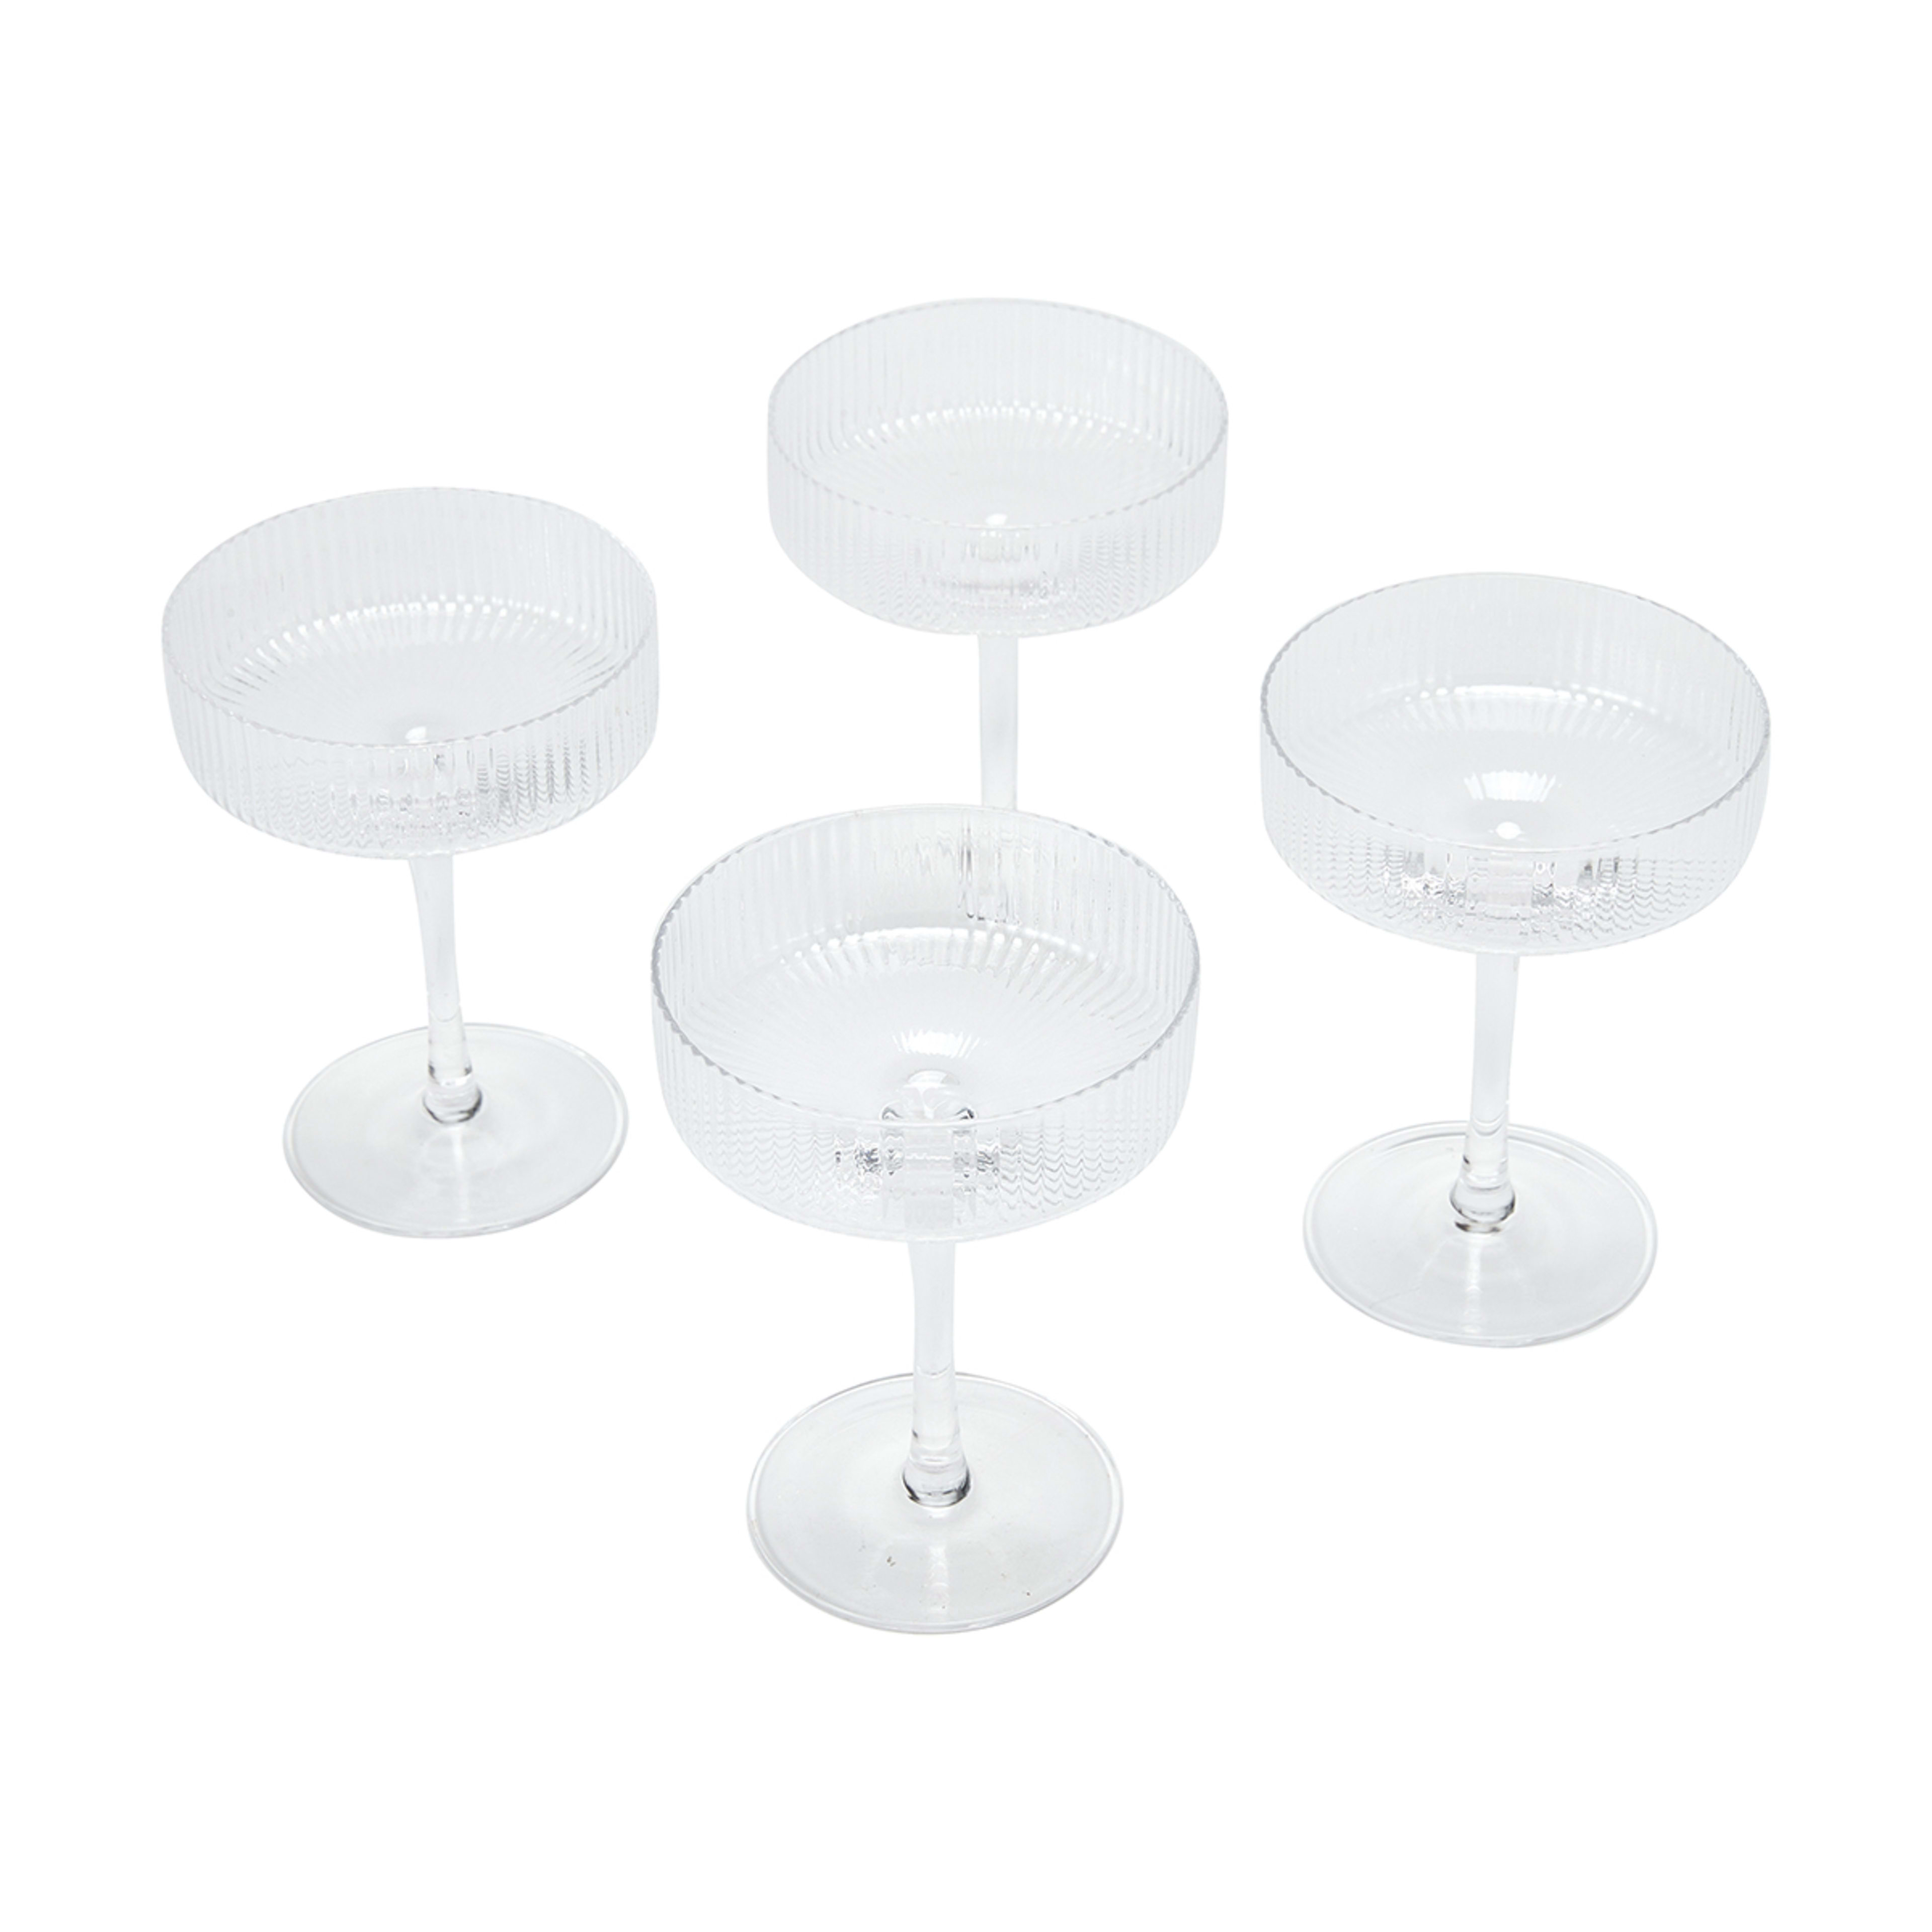 4 Linear Coupe Champagne Glasses